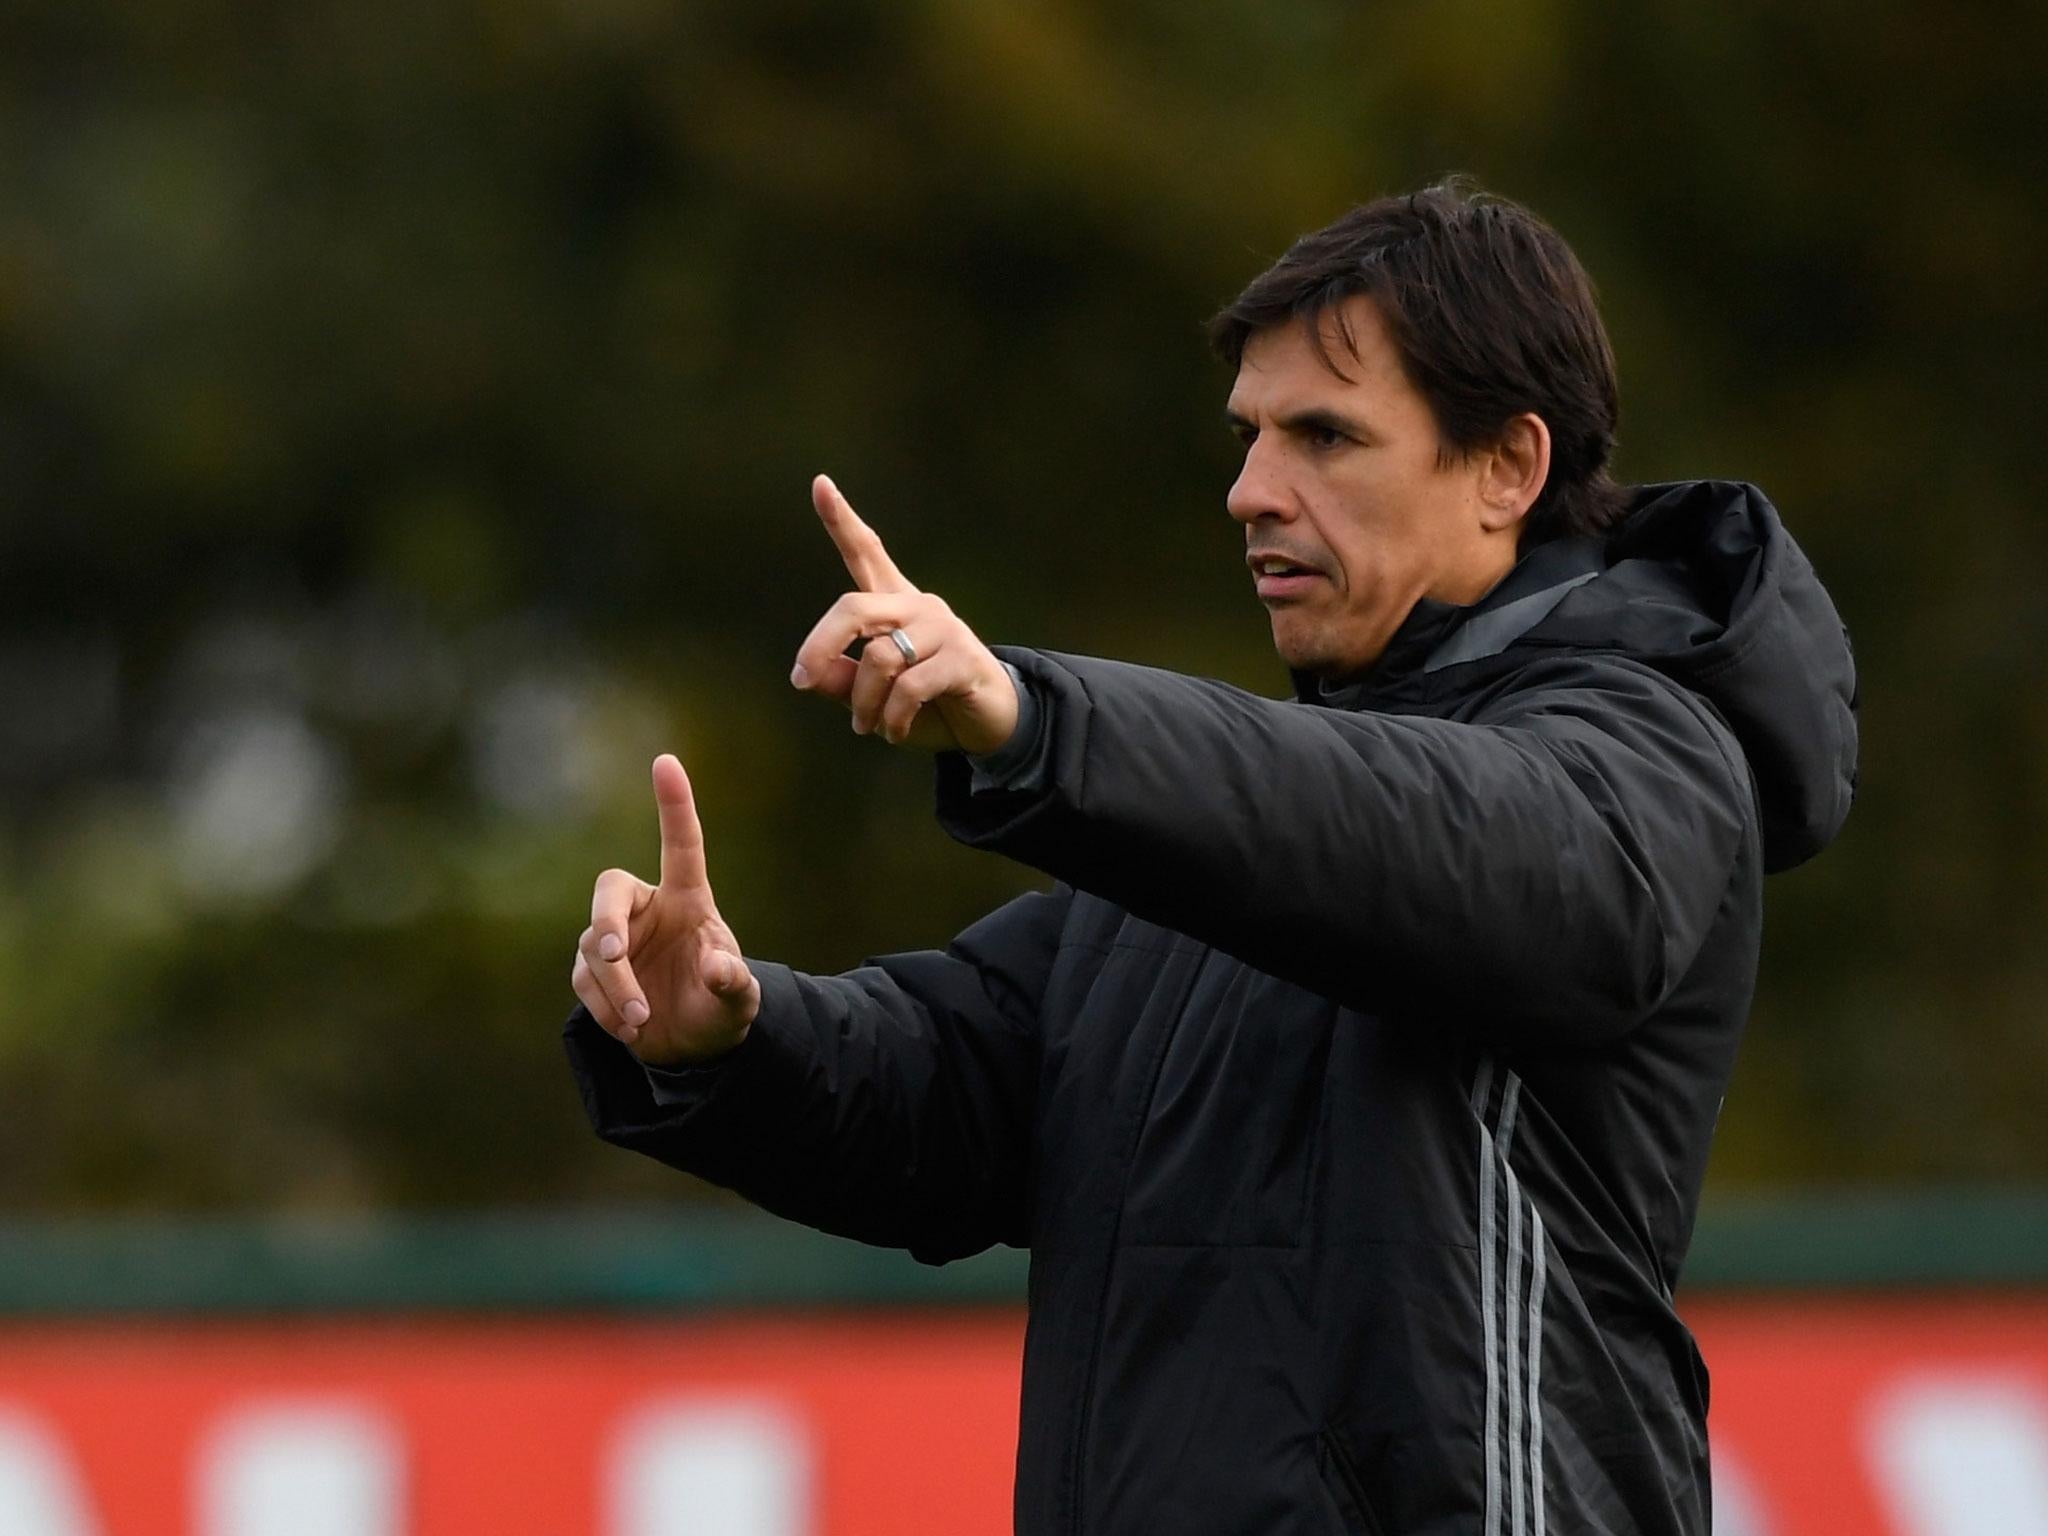 Coleman has been Wales manager since 2012